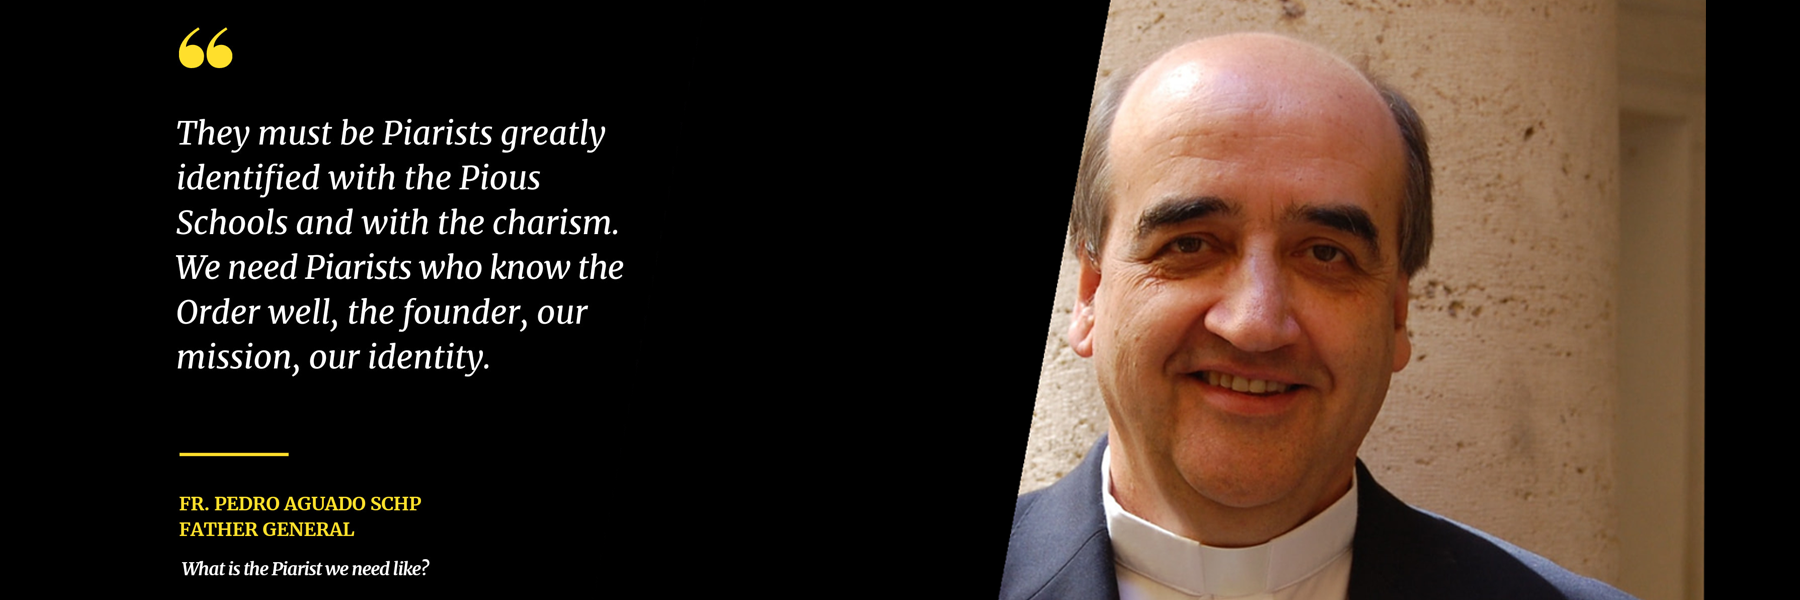 A picture of a smiling priest with a quote by Fr. Pedro Aguado SCHP, Father General